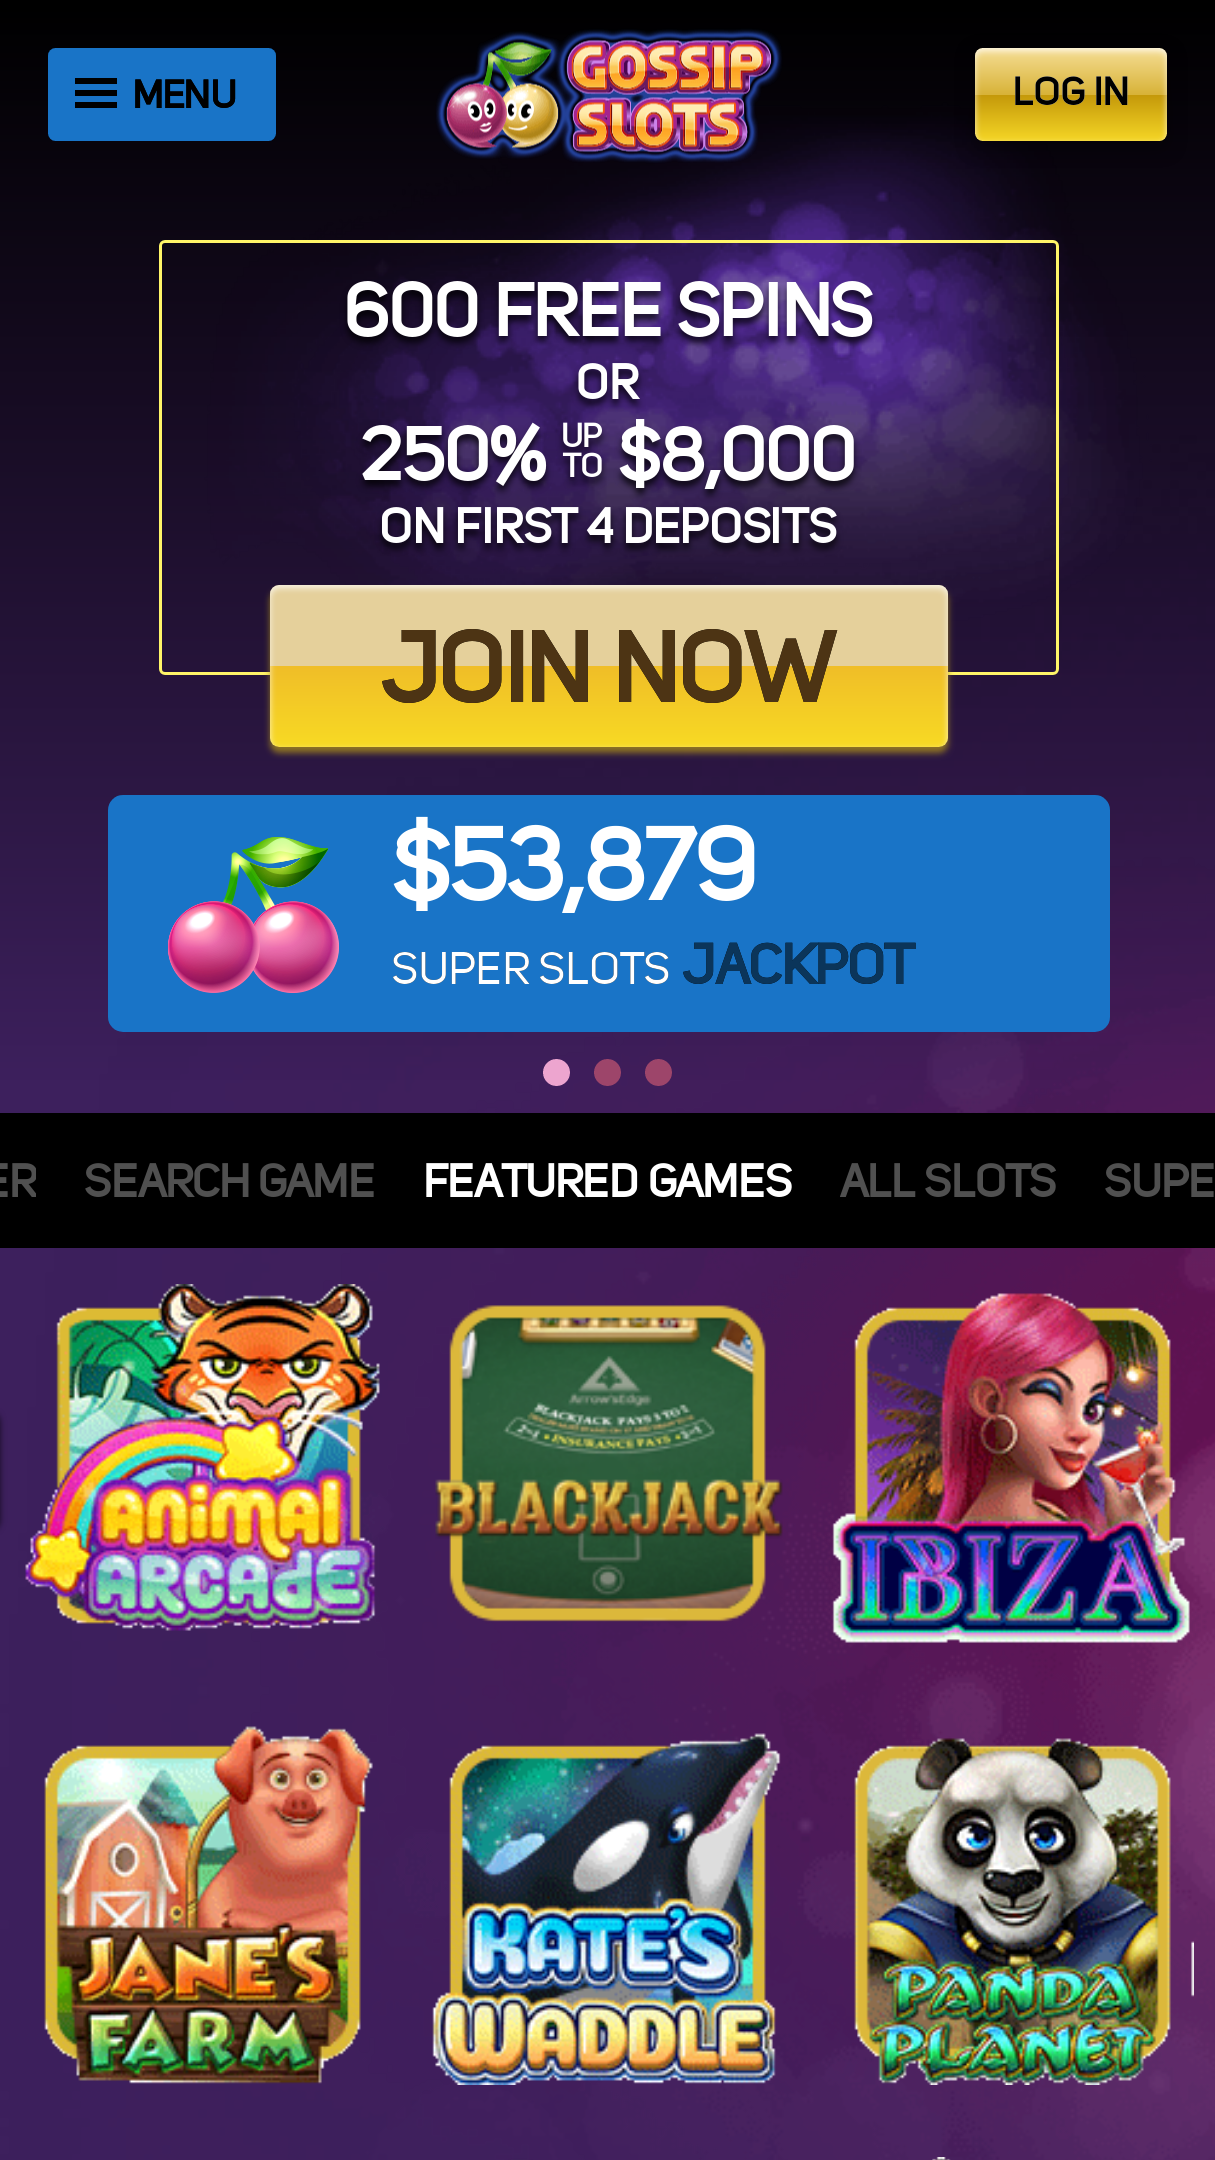 375 Gossip Slots Free Spins in March 2020 Claim now!